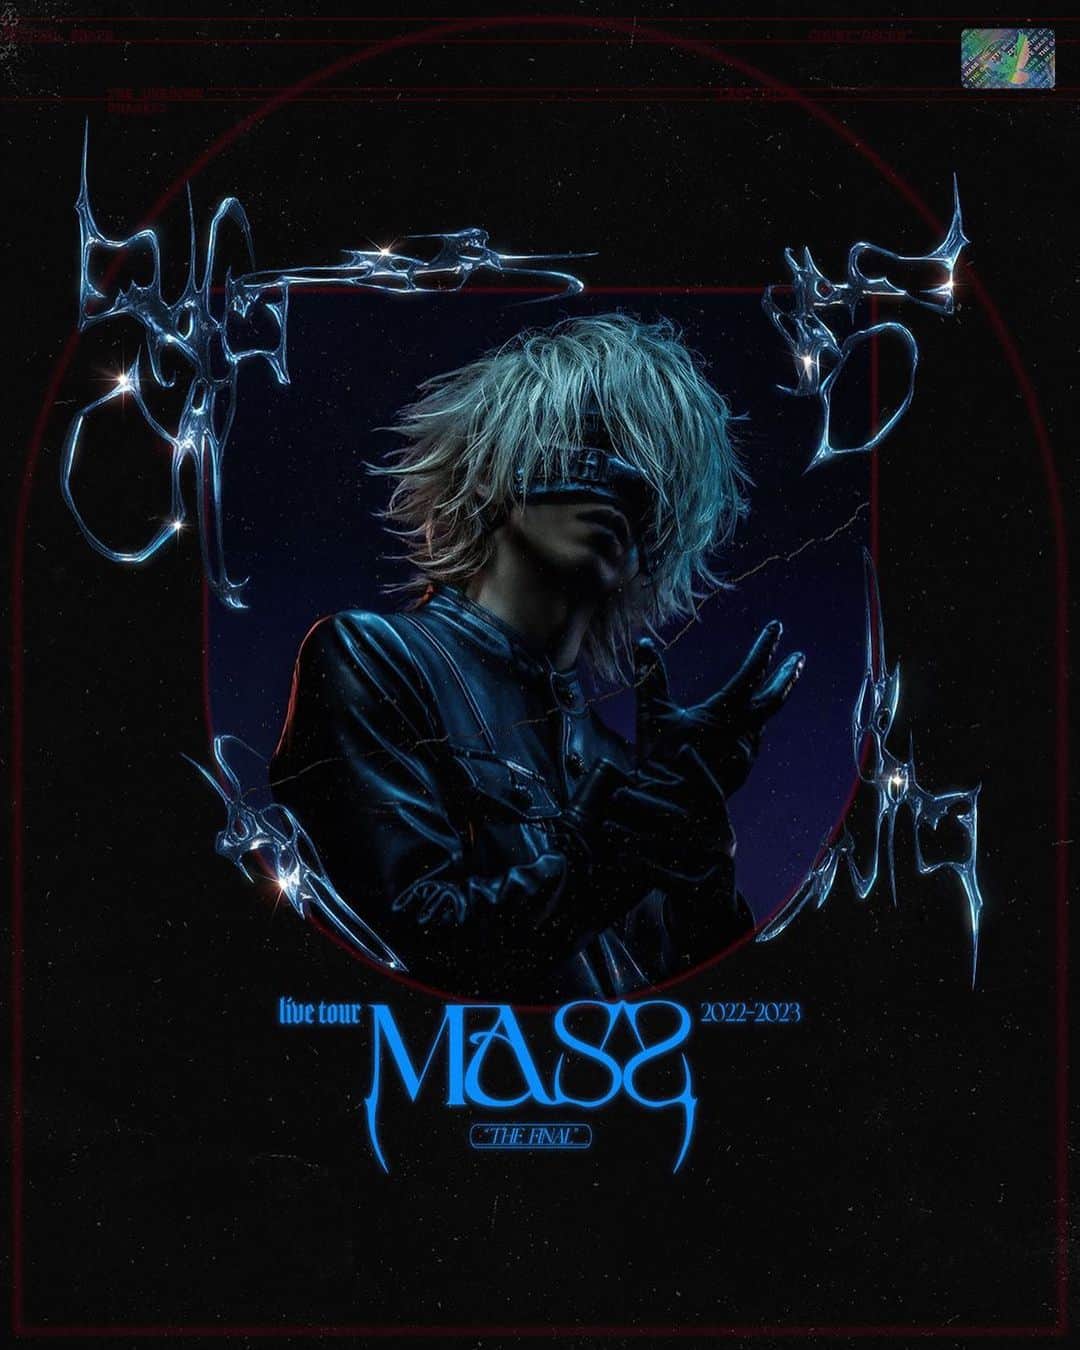 RUKI のインスタグラム：「【MASS "THE FINAL" 日本武道館公演の最新ビジュアル解禁！】  2023年7月15日(土)、日本武道館にて開催される 『the GazettE LIVE TOUR2022-2023 MASS "THE FINAL”』 の最新ビジュアルが解禁✨  本日より本公演チケットのFC.HERESY 2次先行受付・プレイガイド先行受付もスタート🎫 この機会に是非ご利用ください！  the GazettE 10th ALBUM『MASS』の集大成。 その目に焼き付けて、共に最高の夜を過ごしましょう🔥  ■the GazettE LIVE TOUR2022-2023 MASS "THE FINAL" 2023年7月15日(土) 日本武道館 OPEN16:30/START17:30  [チケット情報] 全席指定 前売￥9,600(税込) ※未就学児入場不可、諸サービス手数料別  ▼チケット情報等の詳細は公演特設ページをチェック！ https://the-gazette.com/2023_mass_thefinal/  ＝＝＝＝＝＝＝  【The new visual for MASS "THE FINAL" at Nippon Budokan concert has been unveiled!】  It will be held at Nippon Budokan on Saturday, July 15, 2023. 『the GazettE LIVE TOUR2022-2023 MASS "THE FINAL"』 The new visual has been unveiled!  From today, FC.HERESY 2nd pre-registration and play guide pre-registration for this live ticket will also start! ! Please take advantage of this opportunity!  The culmination of the GazettE 10th ALBUM "MASS". Burn it into your eyes and let's spend the best night together!  ■the GazettE LIVE TOUR2022-2023 MASS "THE FINAL" July 15th (Sat), 2023 Nippon Budokan OPEN16:30/START17:30  [TICKET INFORMATION] All seats reserved : Advance ¥9,600(tax included) *No admission for preschool children. *Service fee not included.  ▼For ticket information, please check the special page! https://the-gazette.com/2023_mass_thefinal/  #theGazettE #TOURFINAL #MASS #日本武道館」